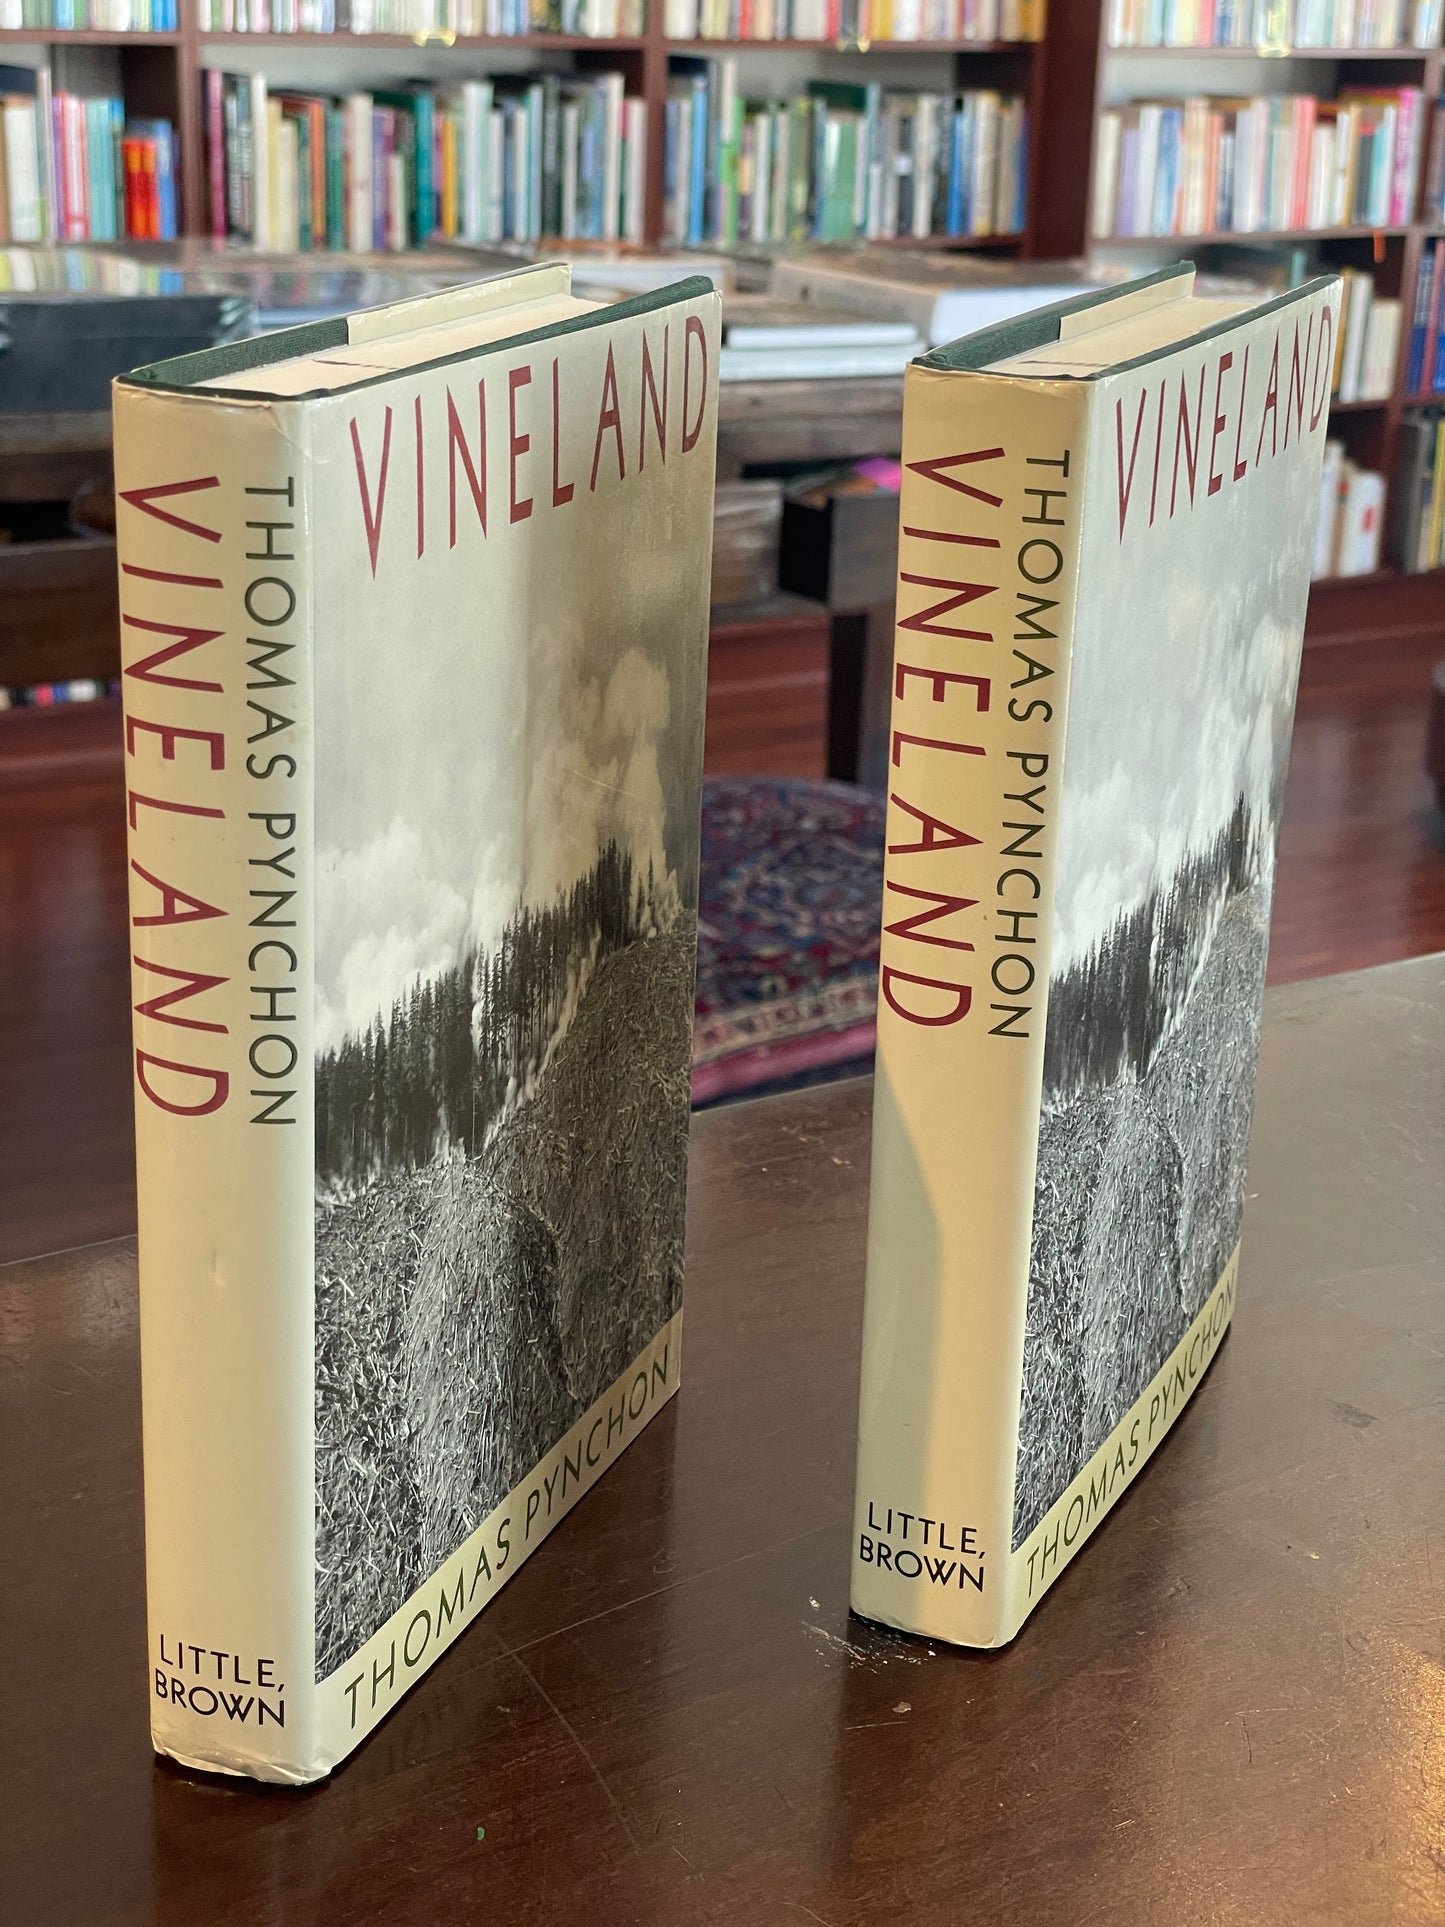 Vineland by Thomas Pynchon (first edition)